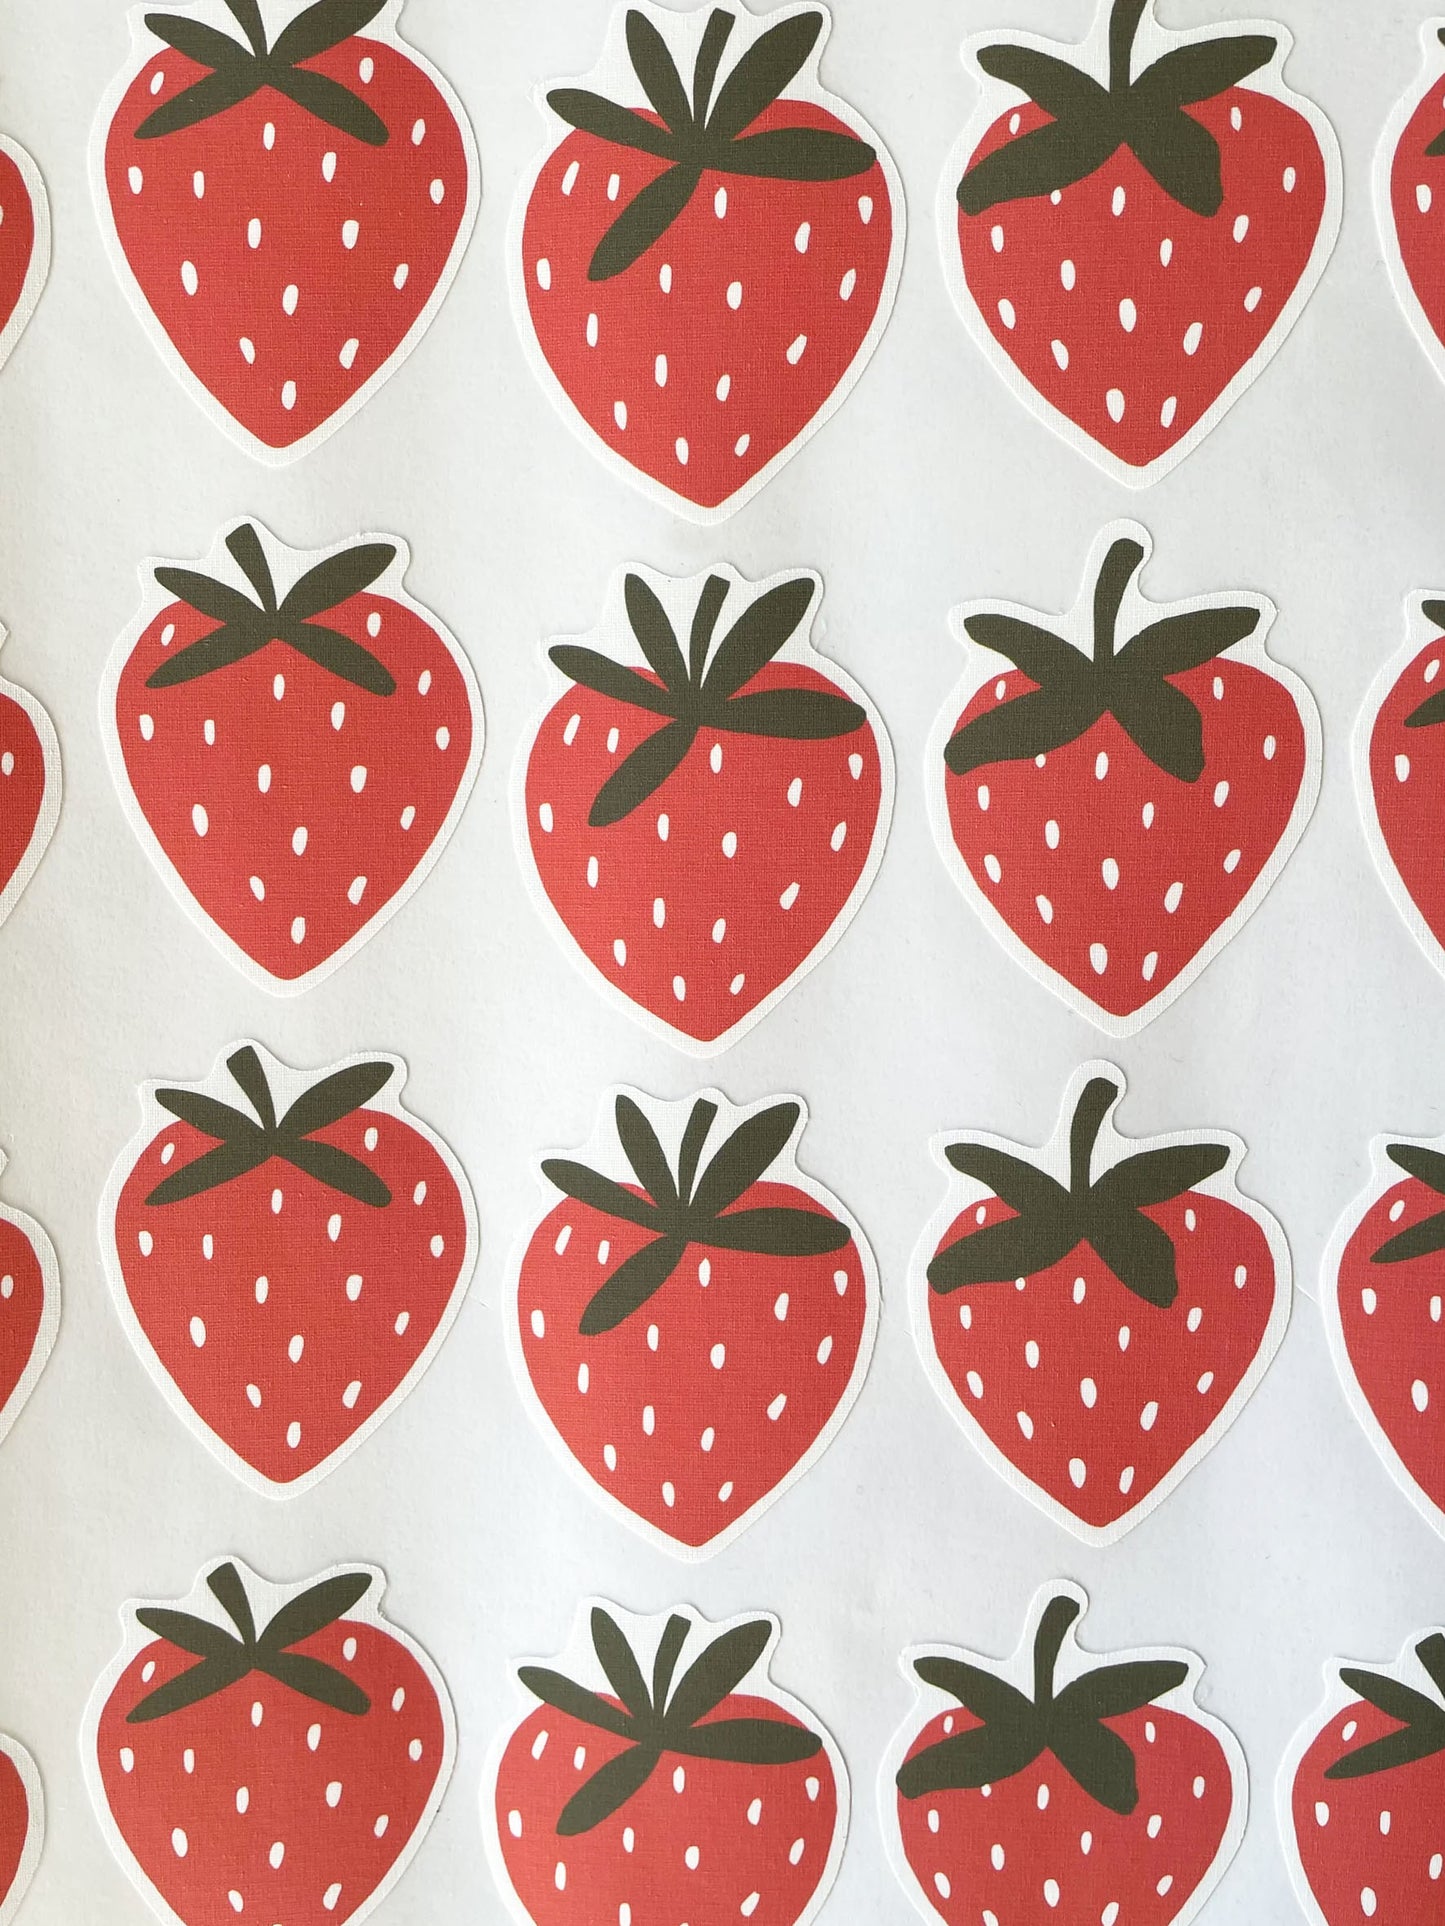 Strawberry Wall Stickers | Eco-Friendly, Removable, Reusable, Fabric Wall Stickers